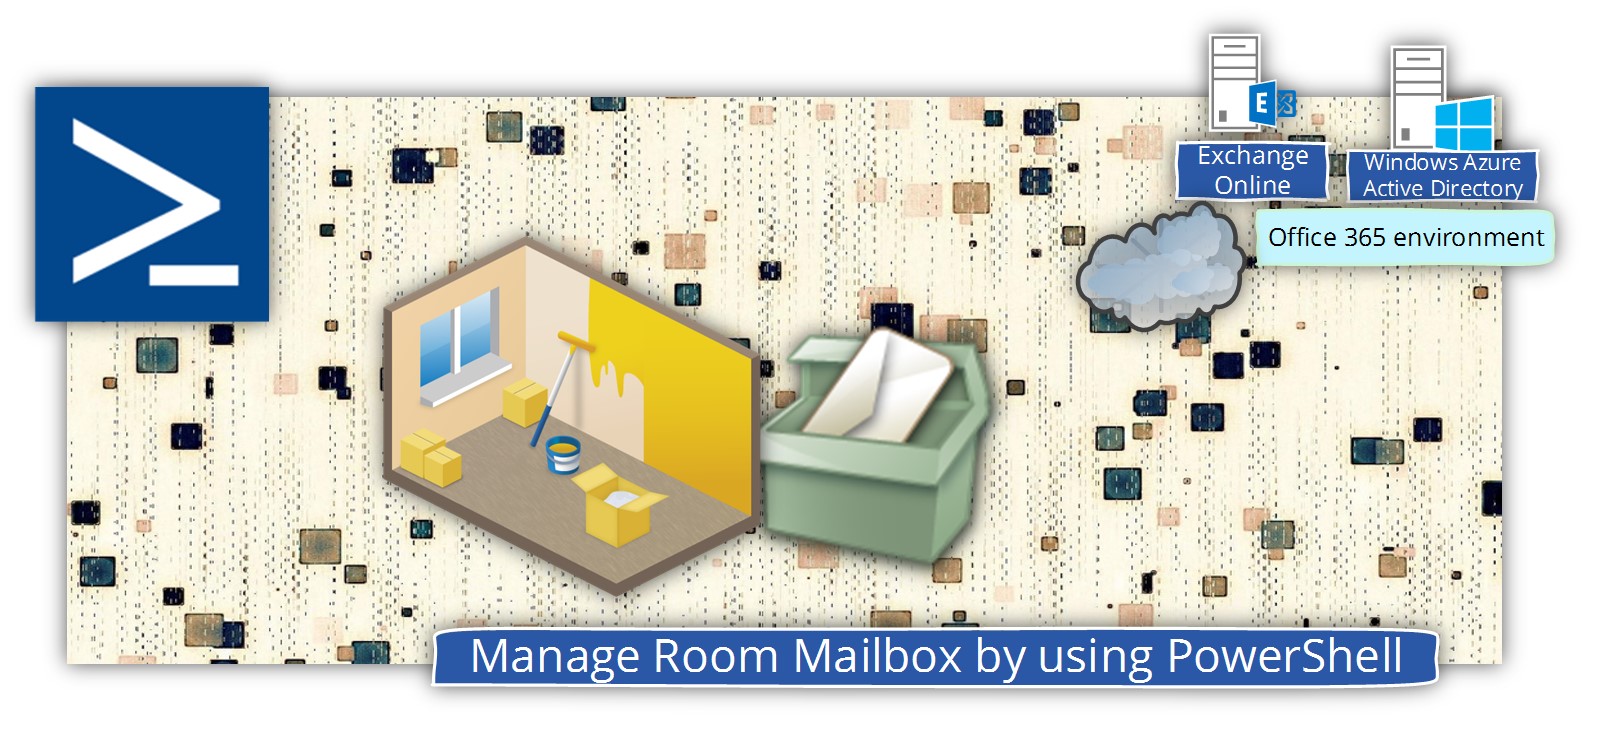 Manage Room Mailbox by using PowerShell | Office 365 - o365info